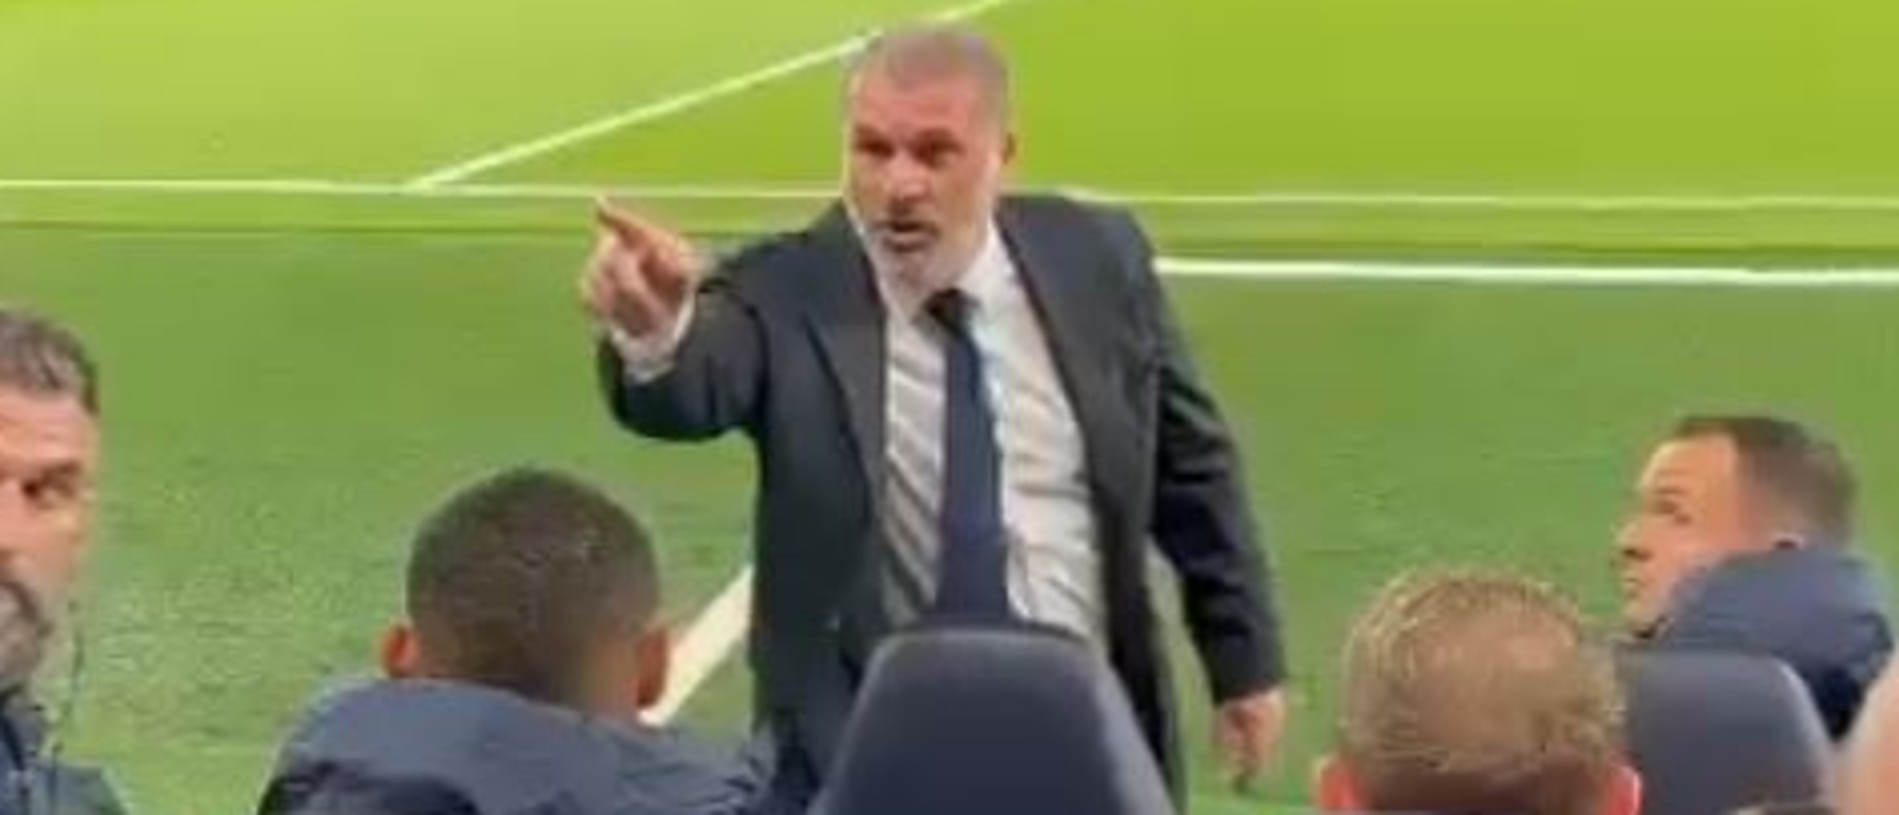 Ange Postecoglou fired up at a fan. Picture: @Spurserk on Twitter